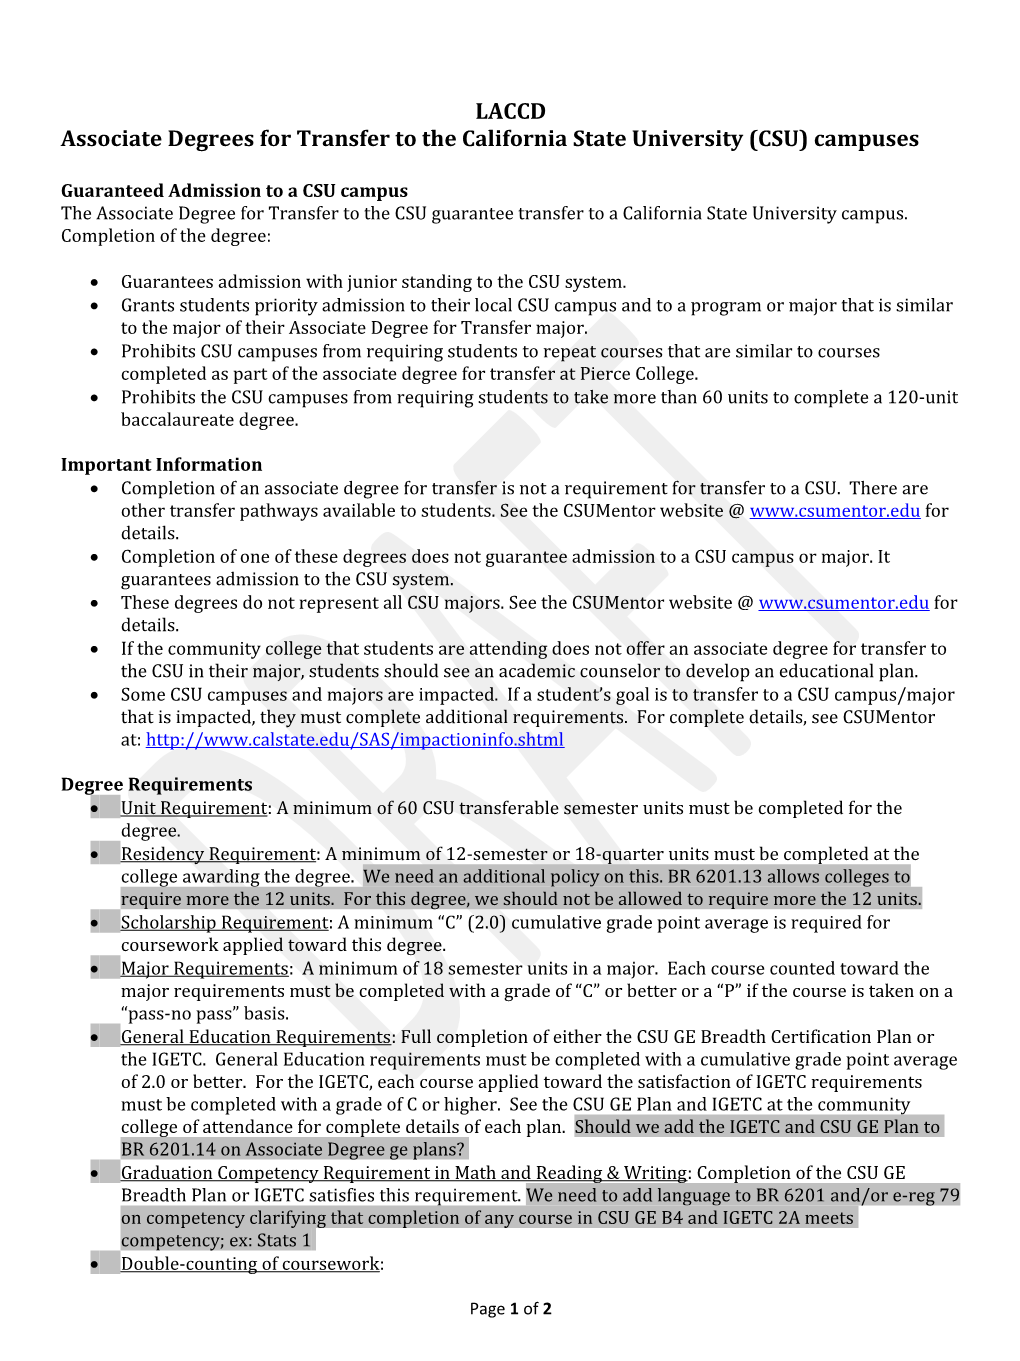 Associate Degrees for Transfer to the California State University (CSU) Campuses